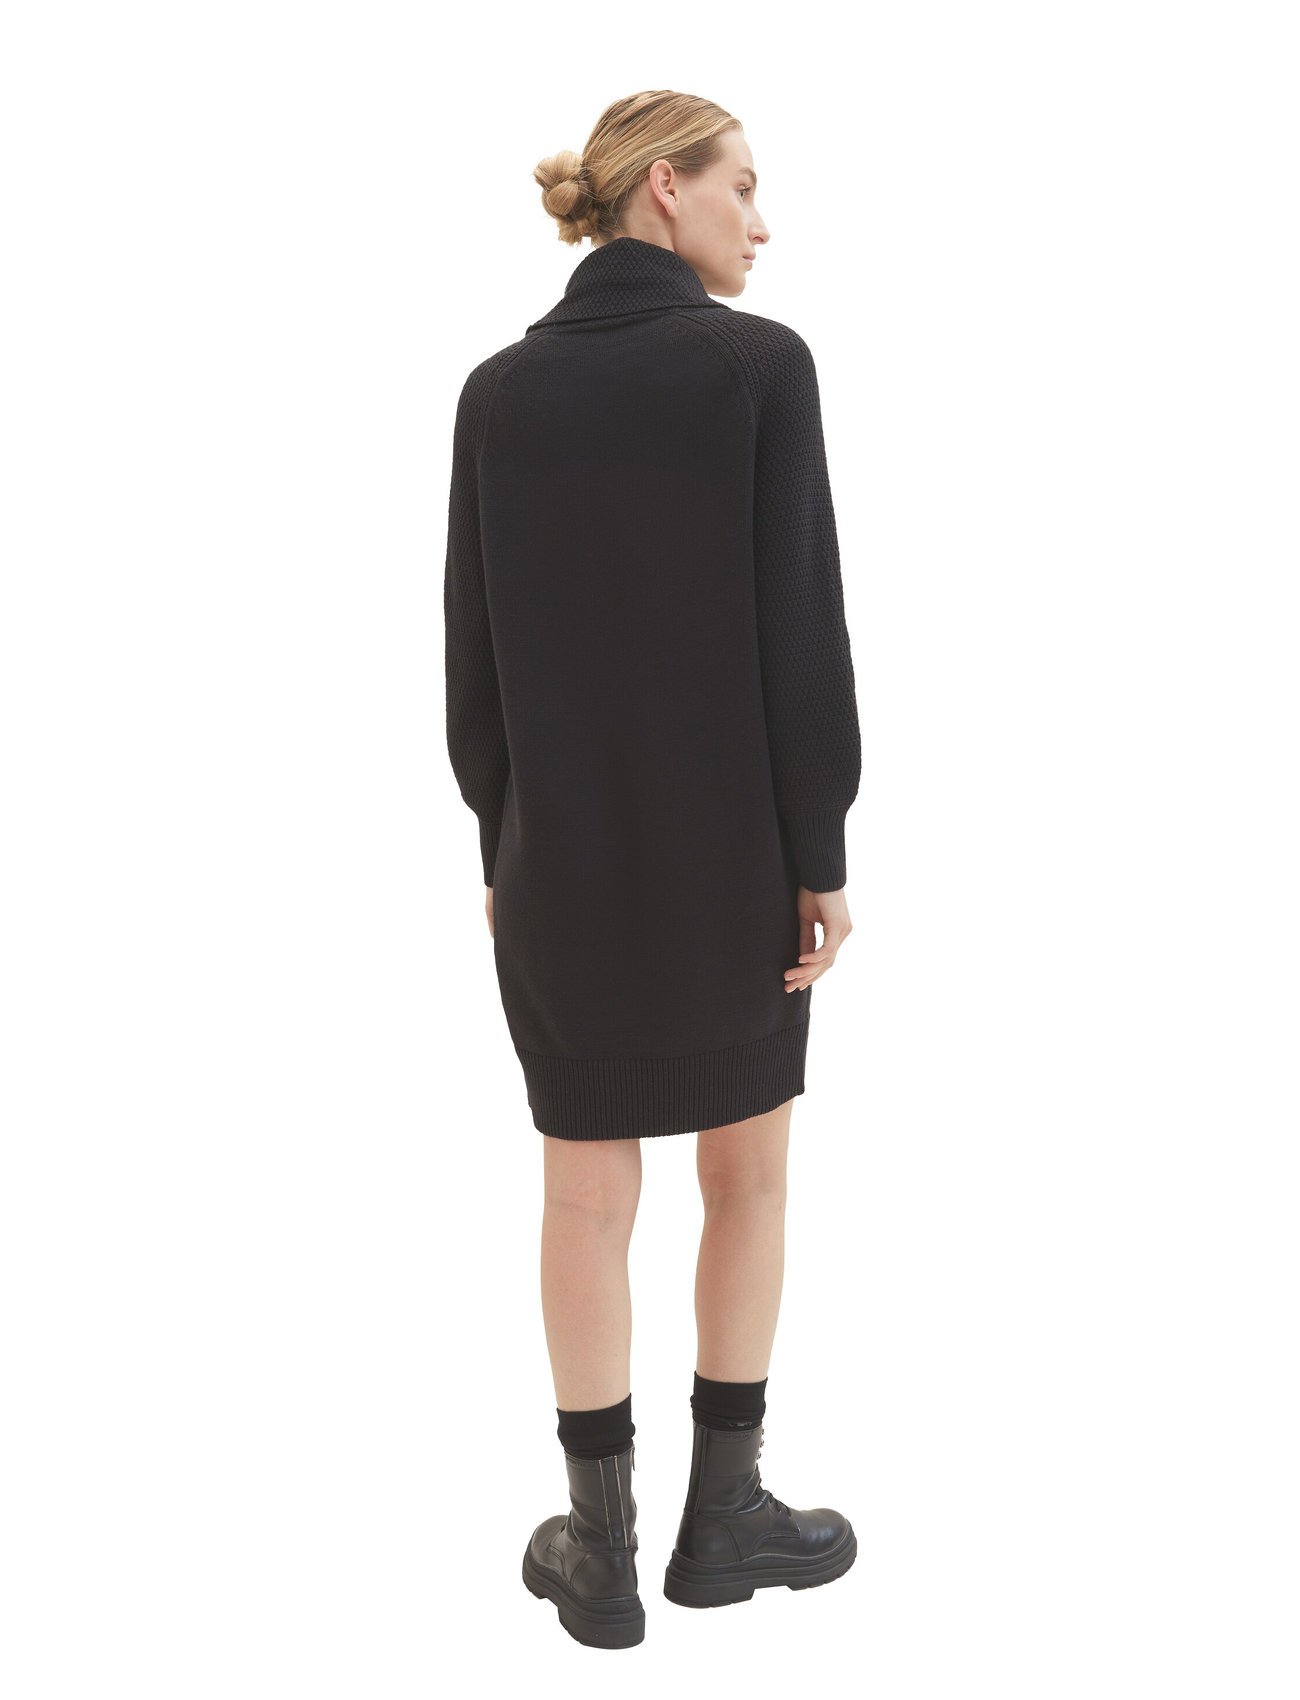 Tom Tailor - dress knitted structure mix - knitted dresses - deep black - 1